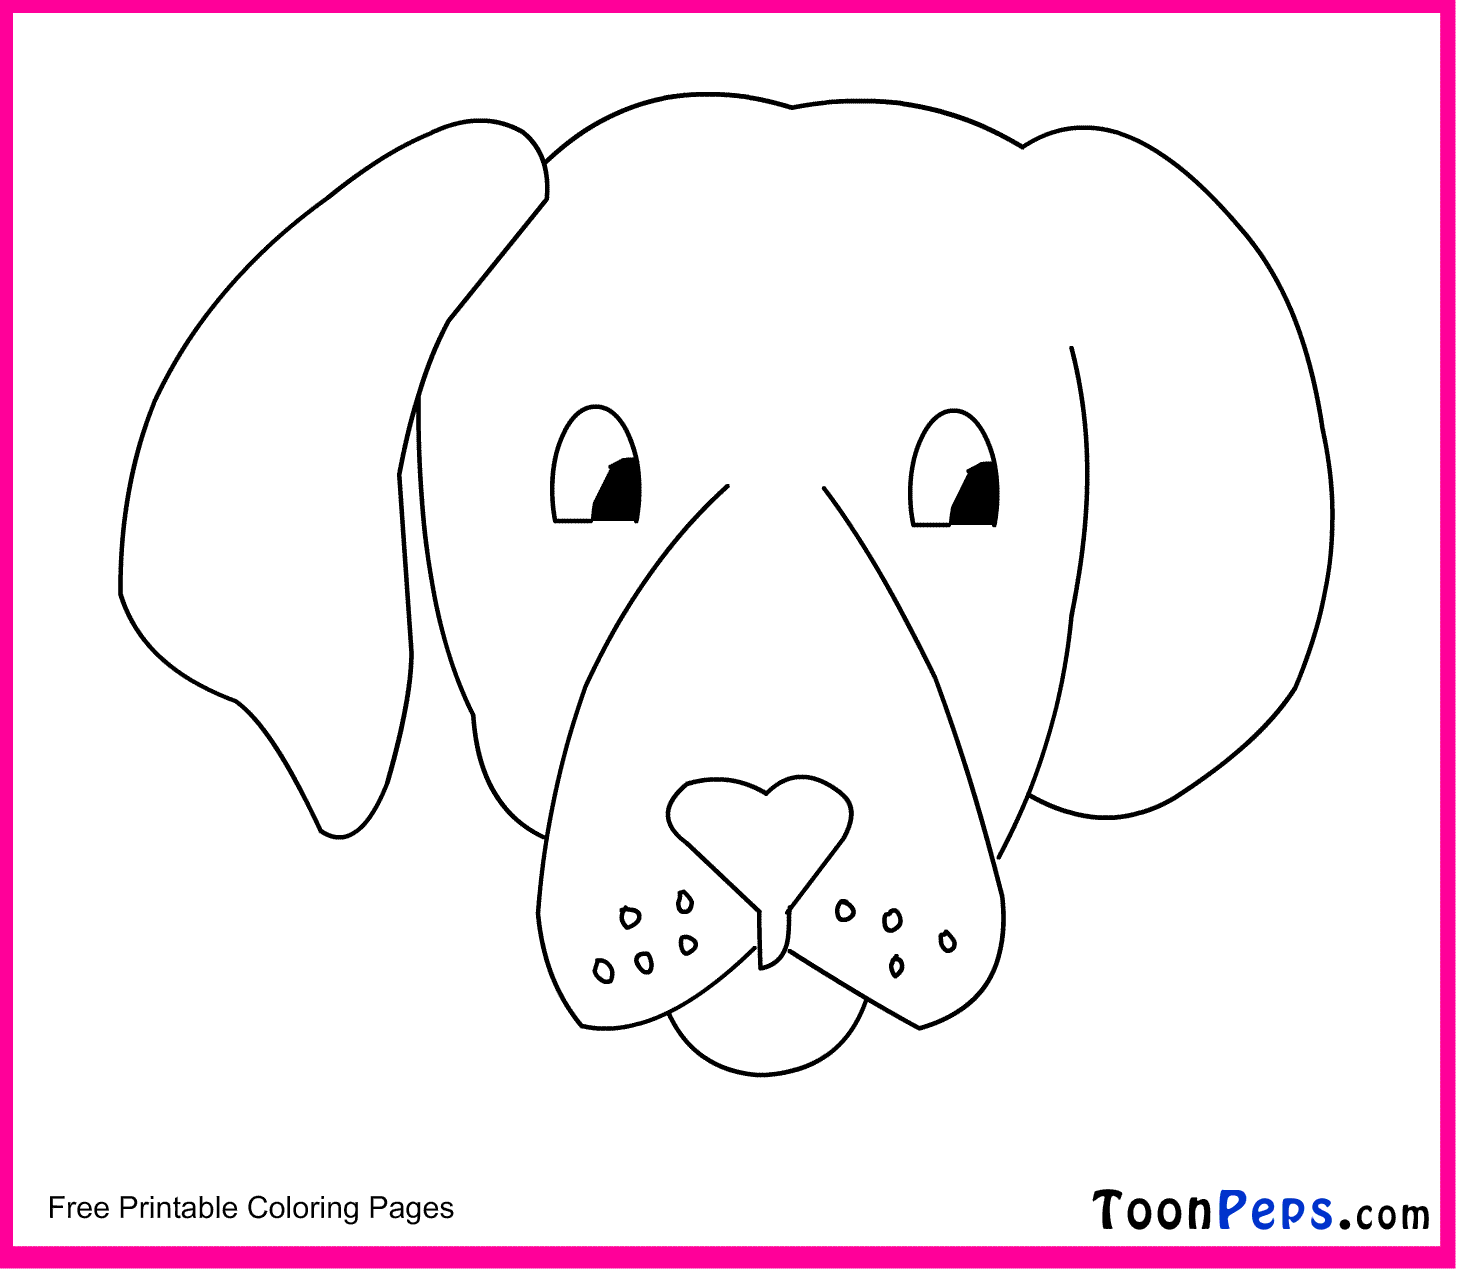 free-dog-face-coloring-page-download-free-dog-face-coloring-page-png